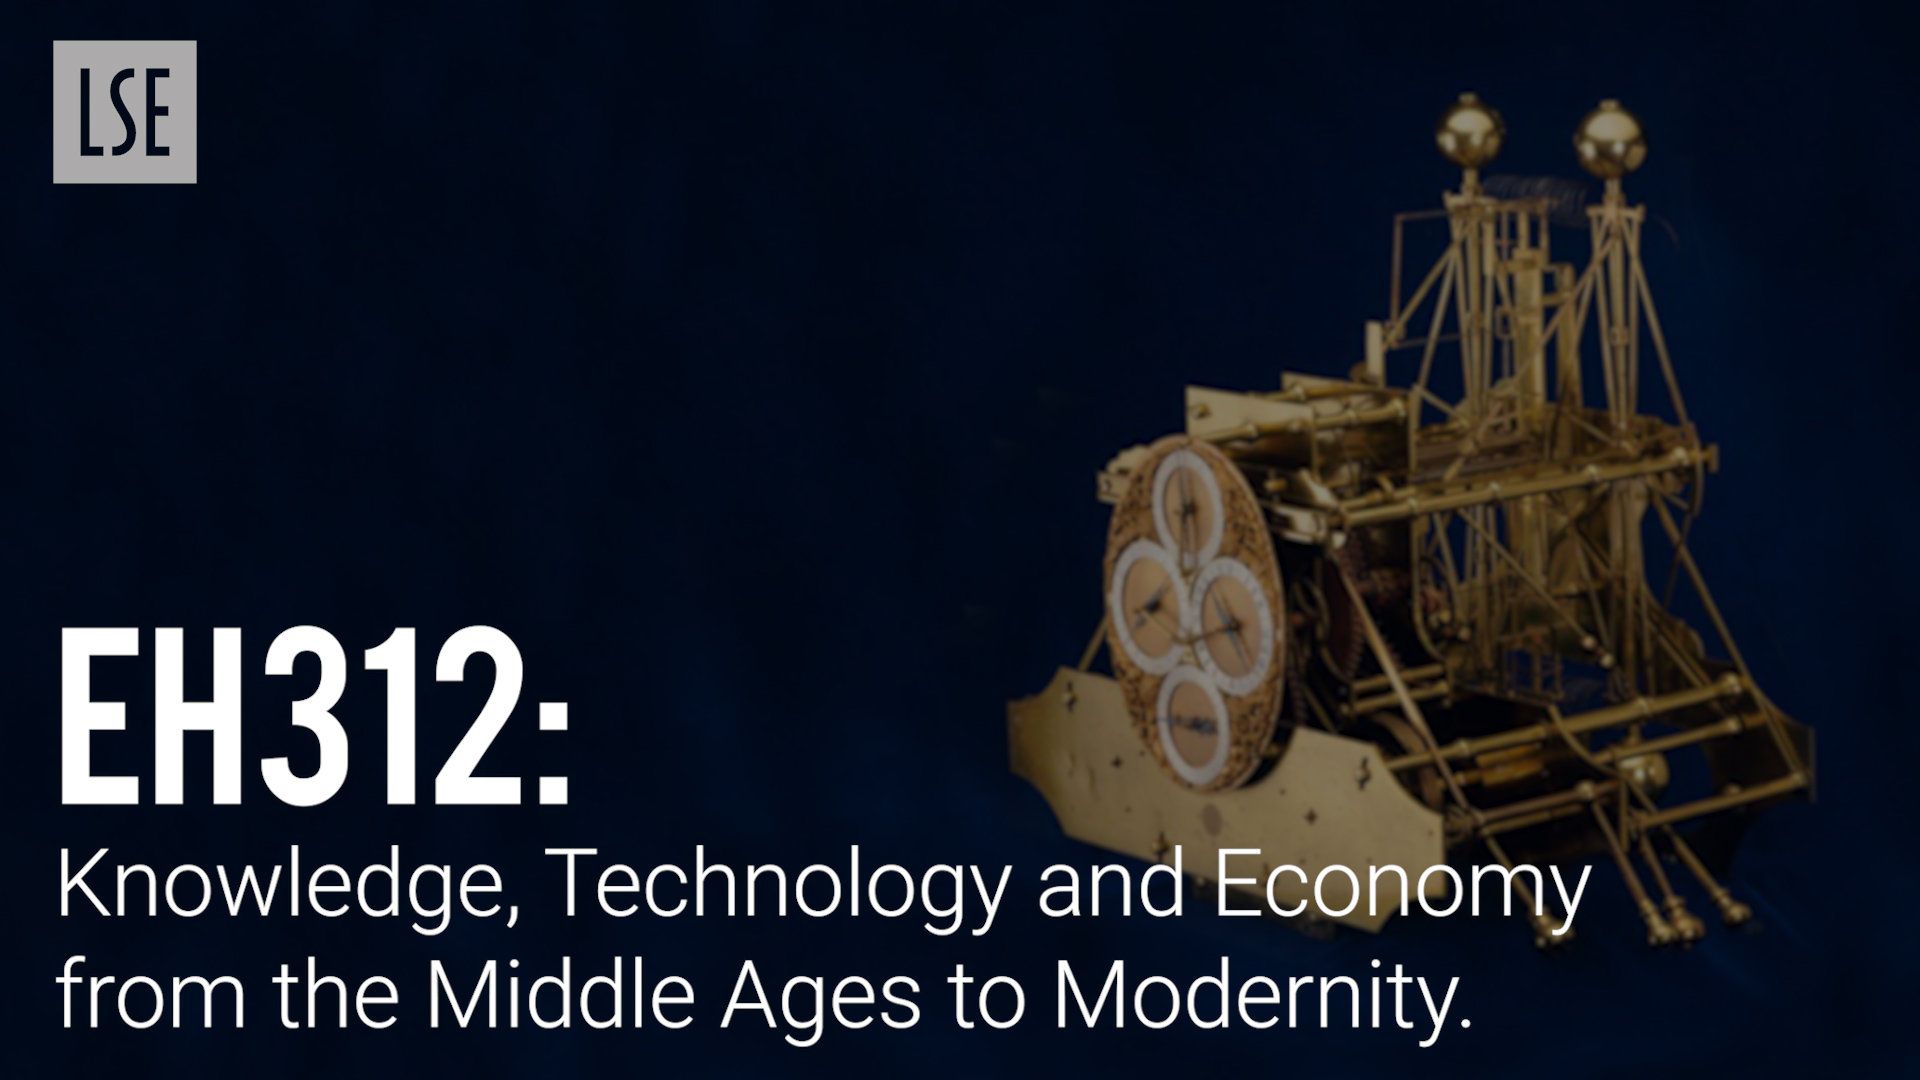 EH312 - Knowledge, Technology and Economy from the Middle Ages to Modernity